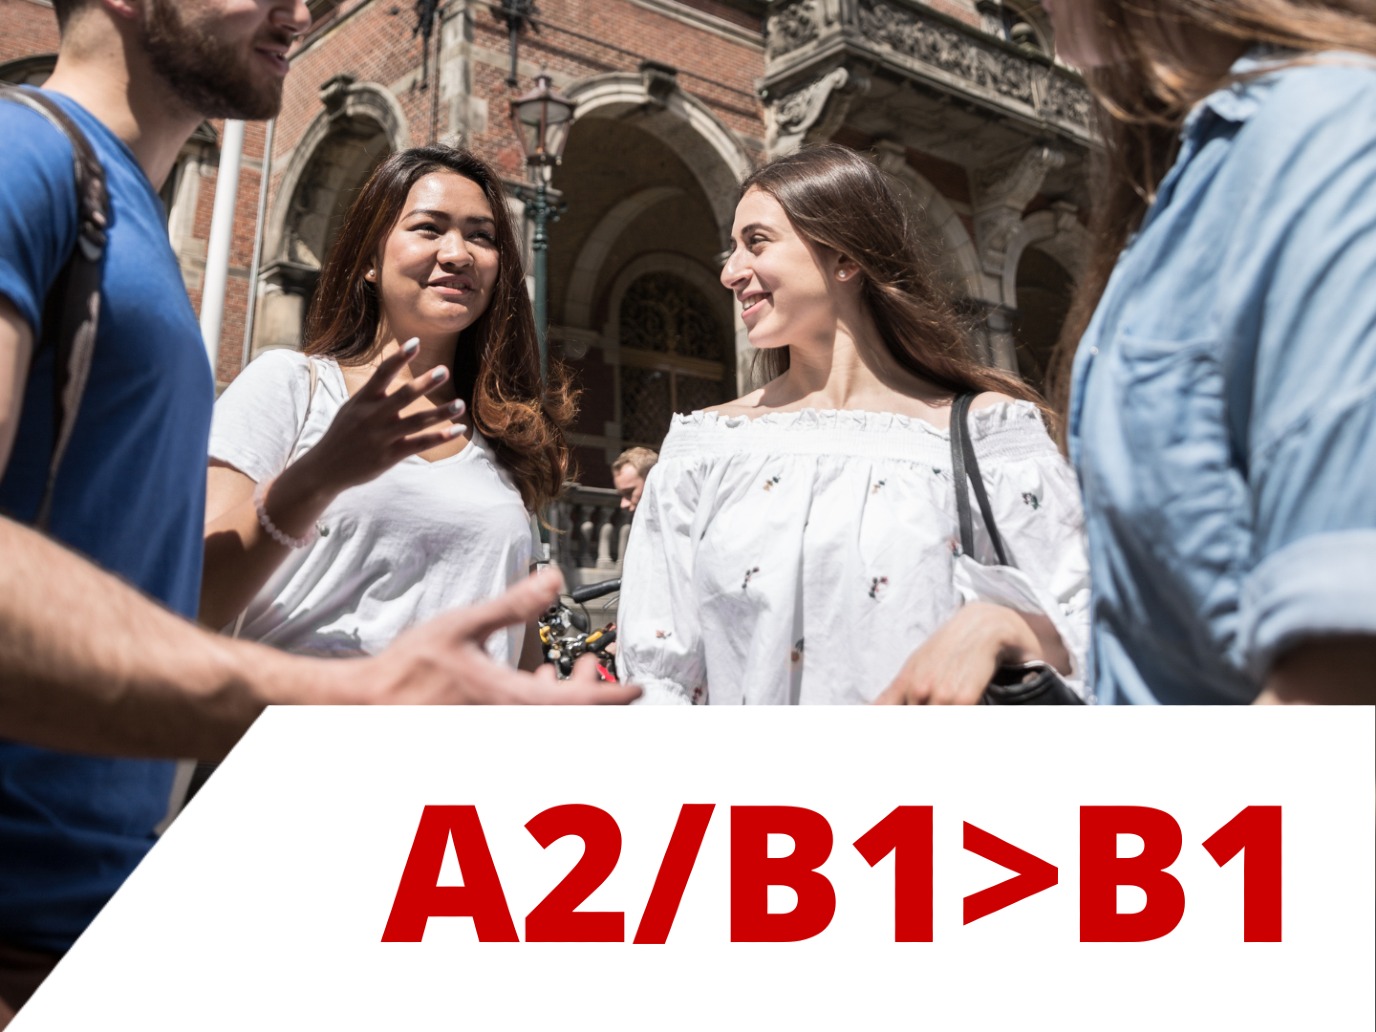 Dutch for native speakers of German   A2/B1>B1